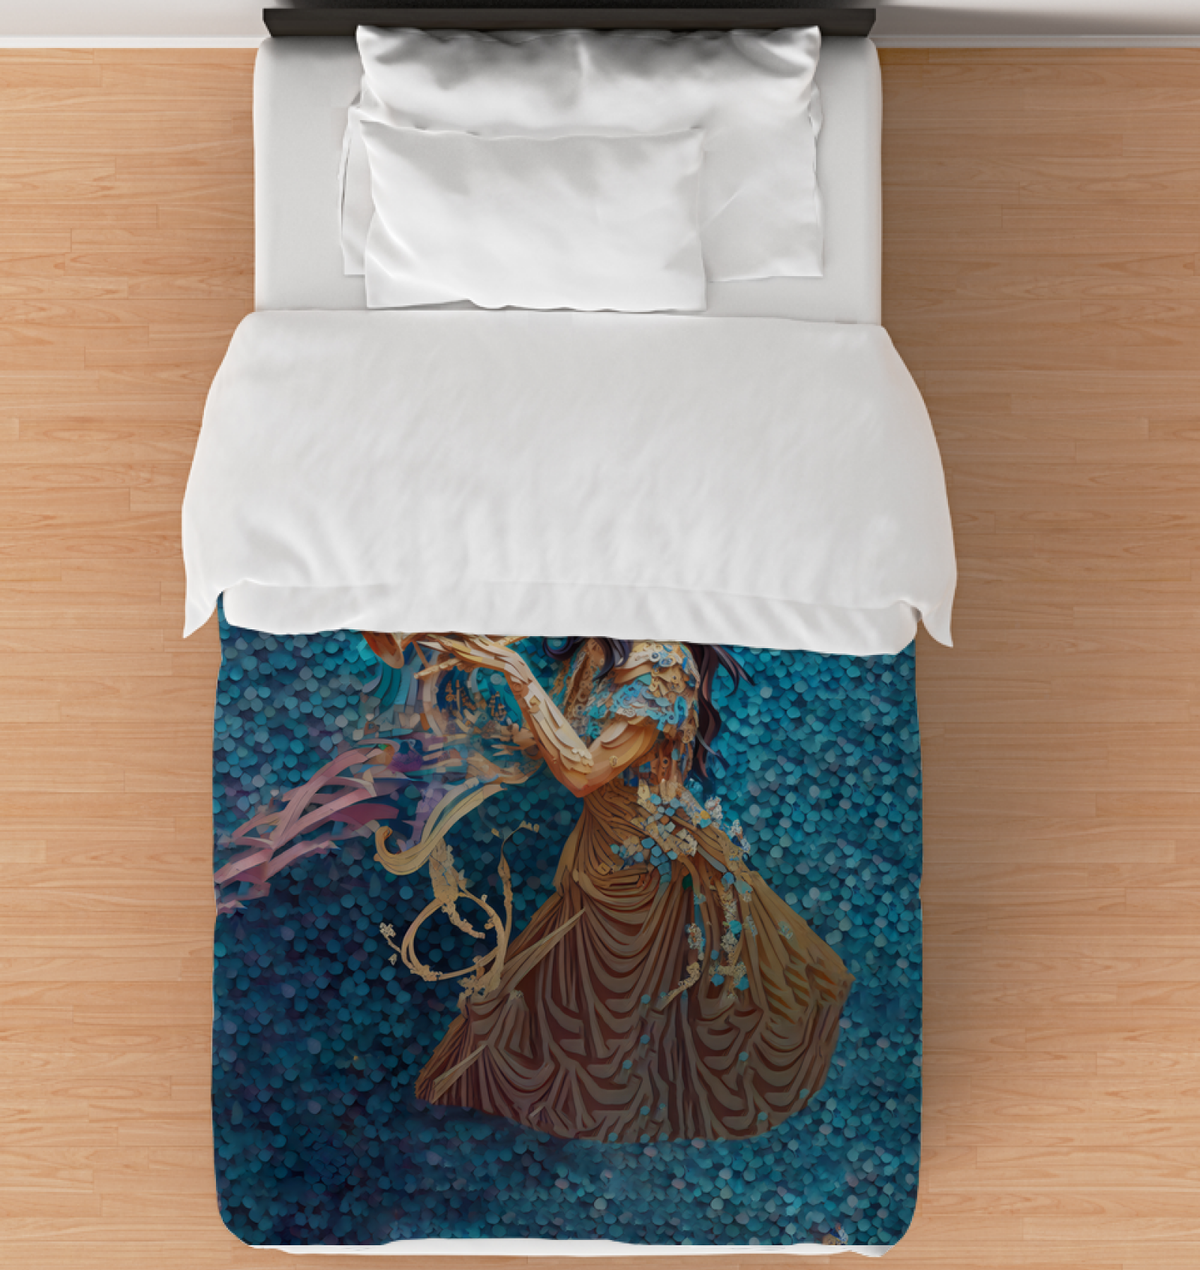 Duvet cover with glowing paper lantern design.